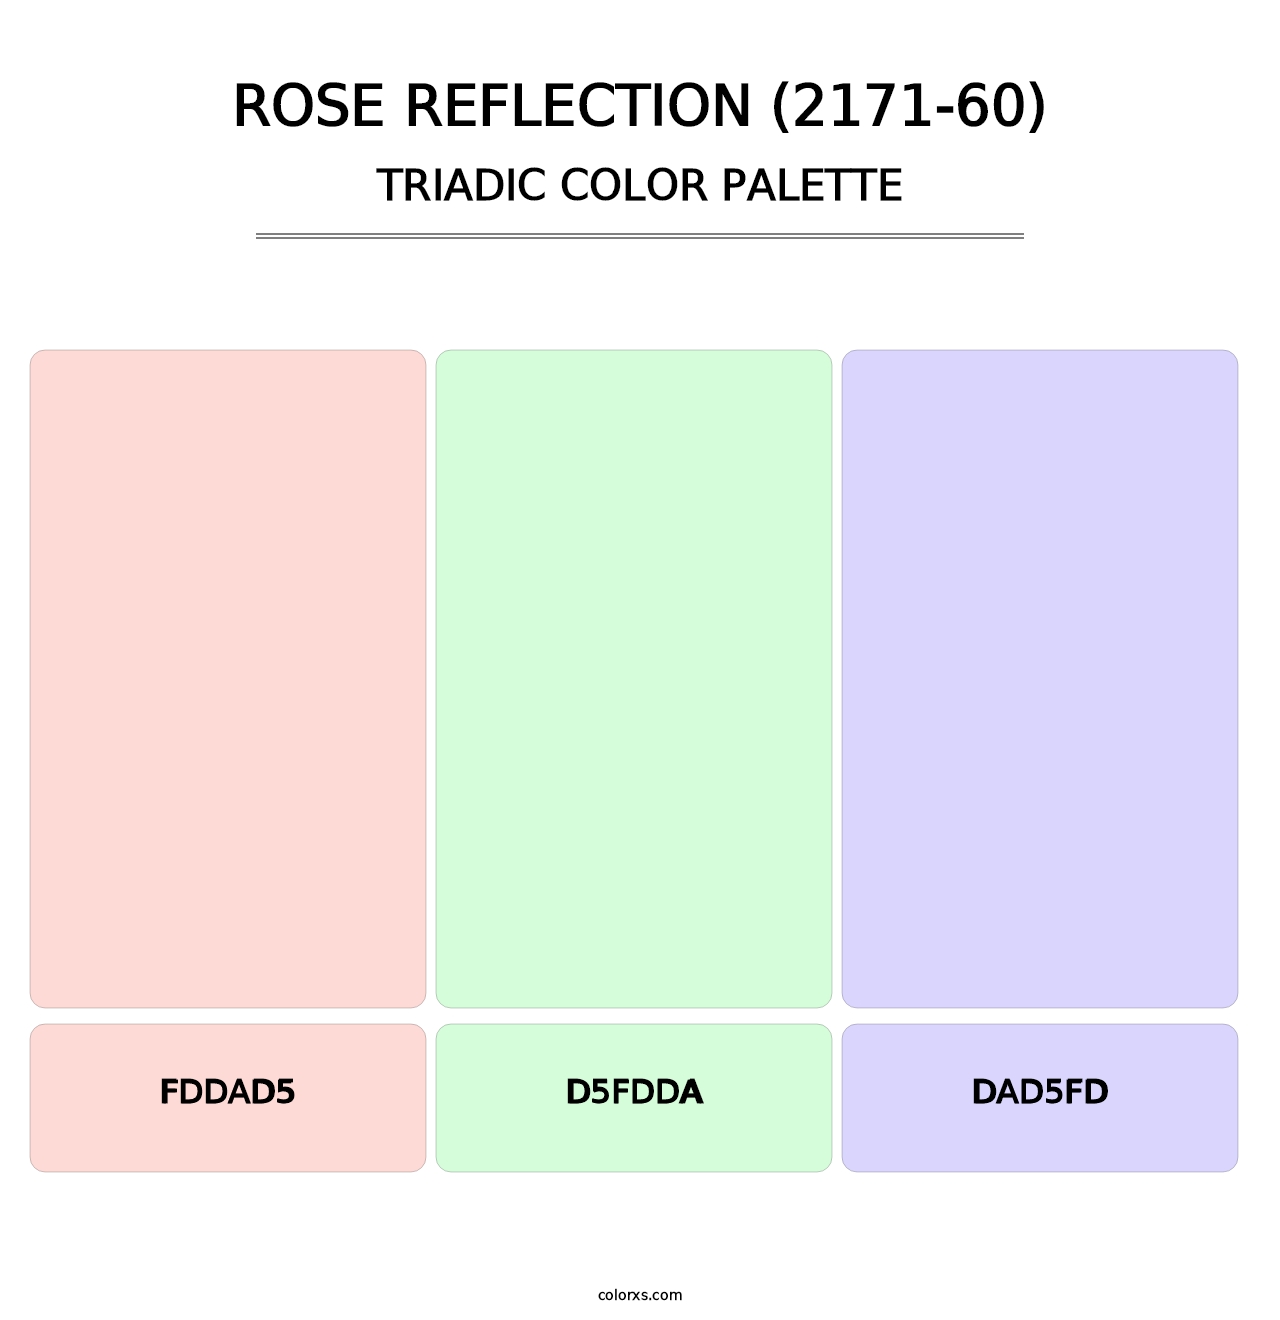 Rose Reflection (2171-60) - Triadic Color Palette